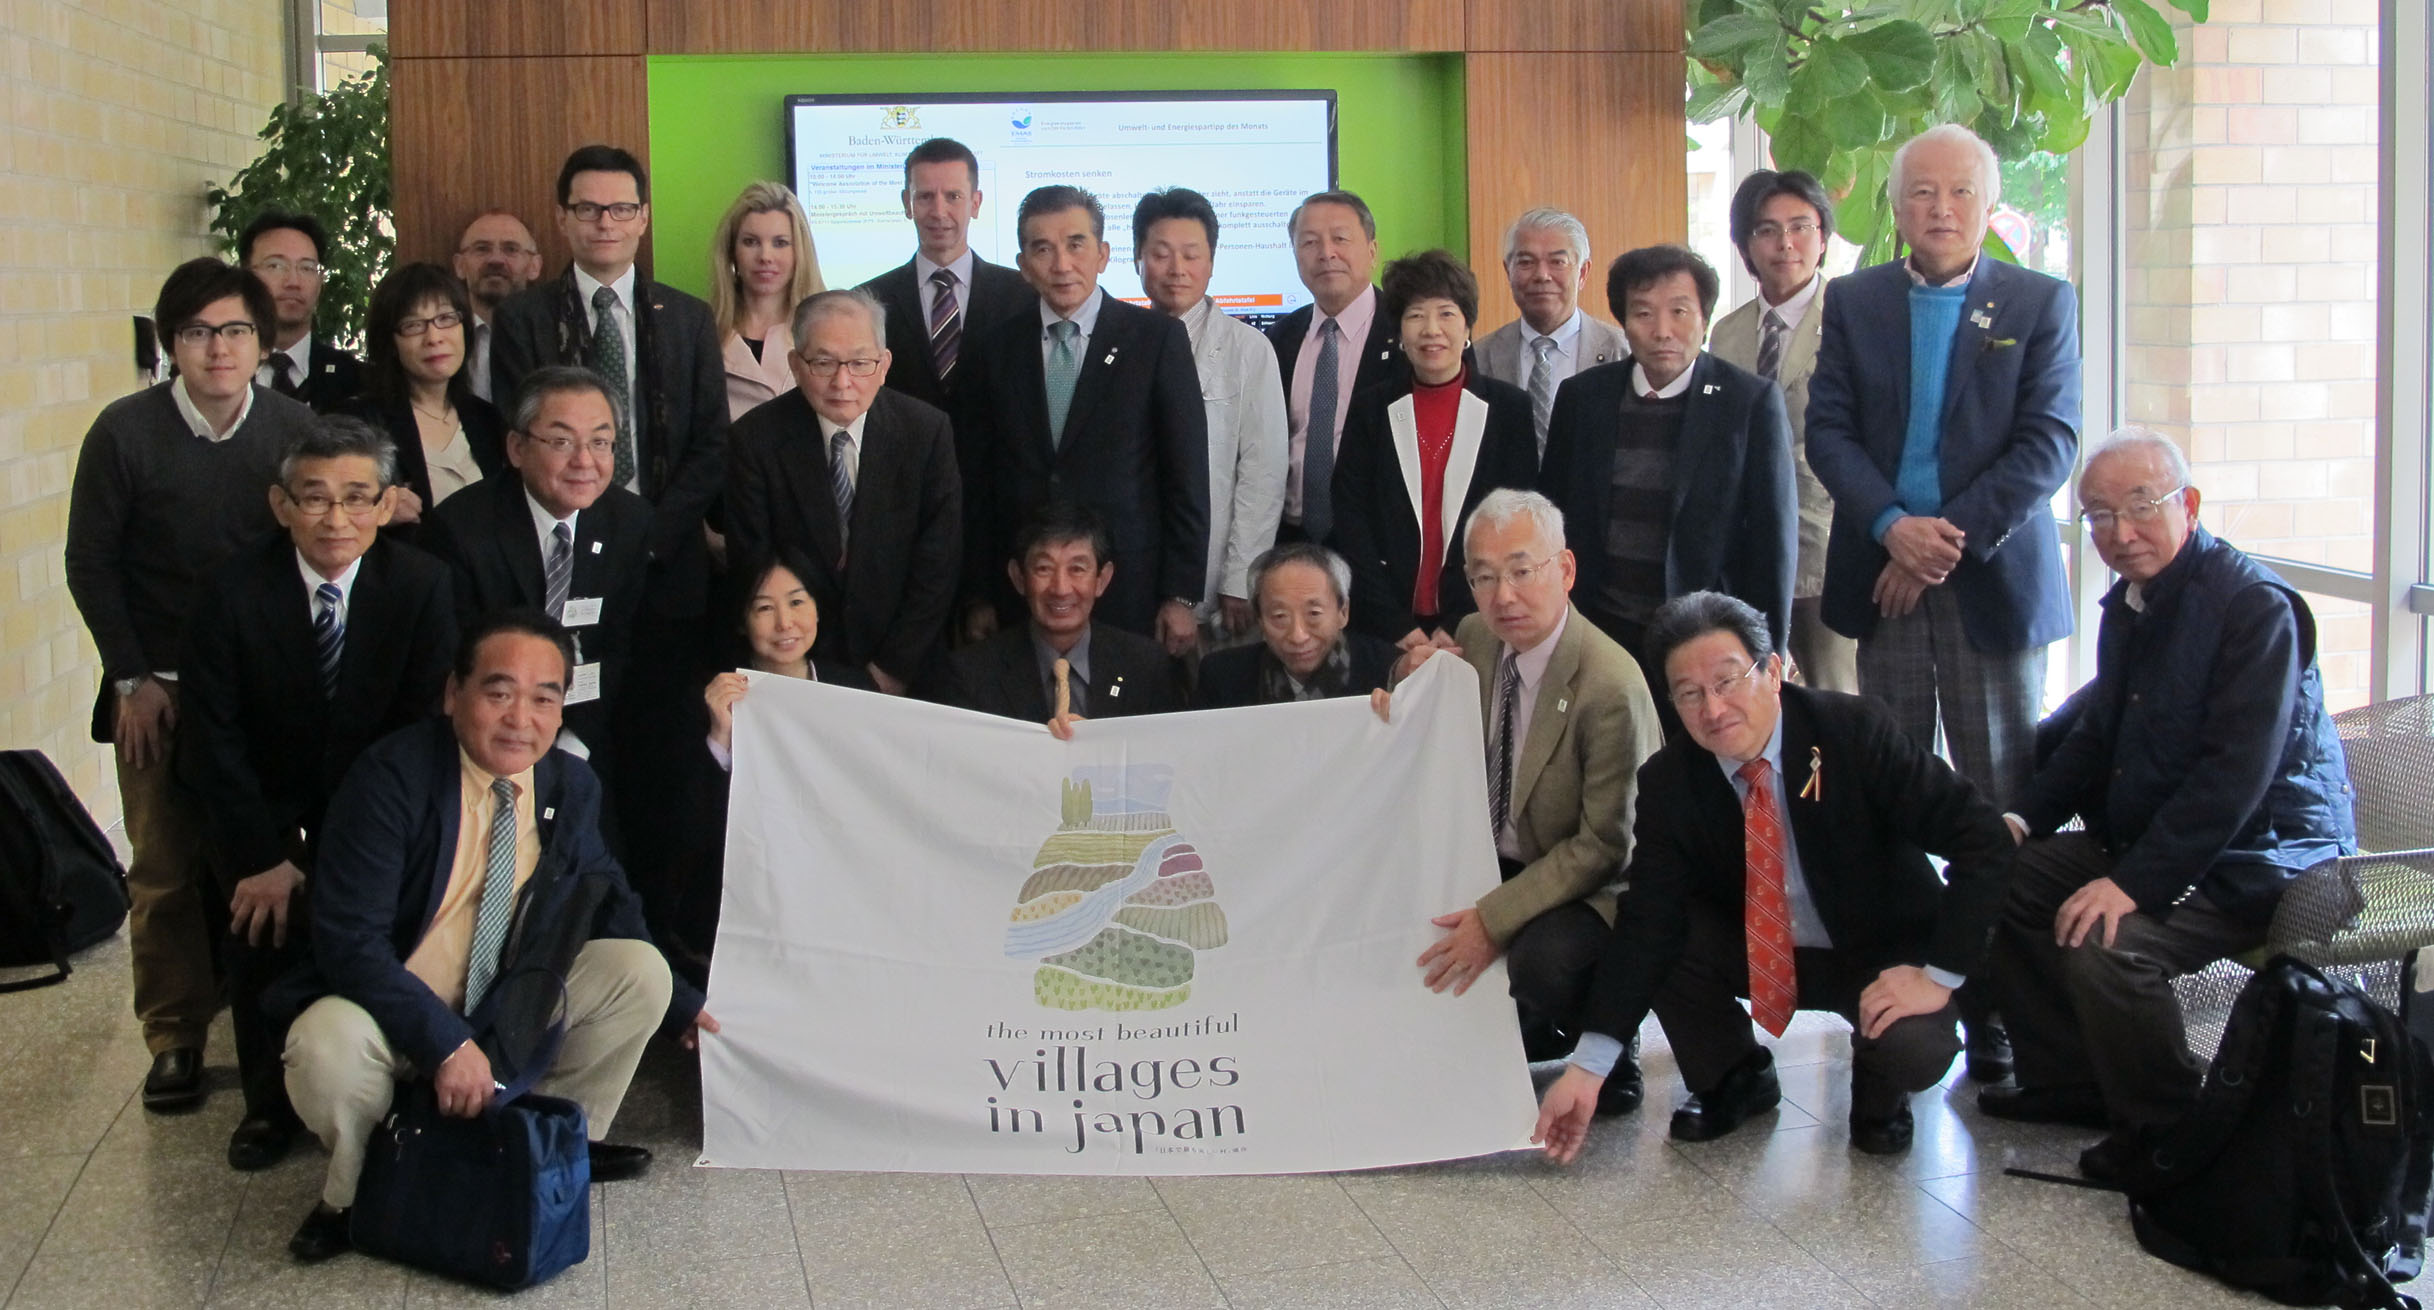 The delegation from the organisation "The Most Beautiful Villages in Japan" (Utsukushii Mura) learned about the expansion of renewable energy at the Ministry of the Environment.']